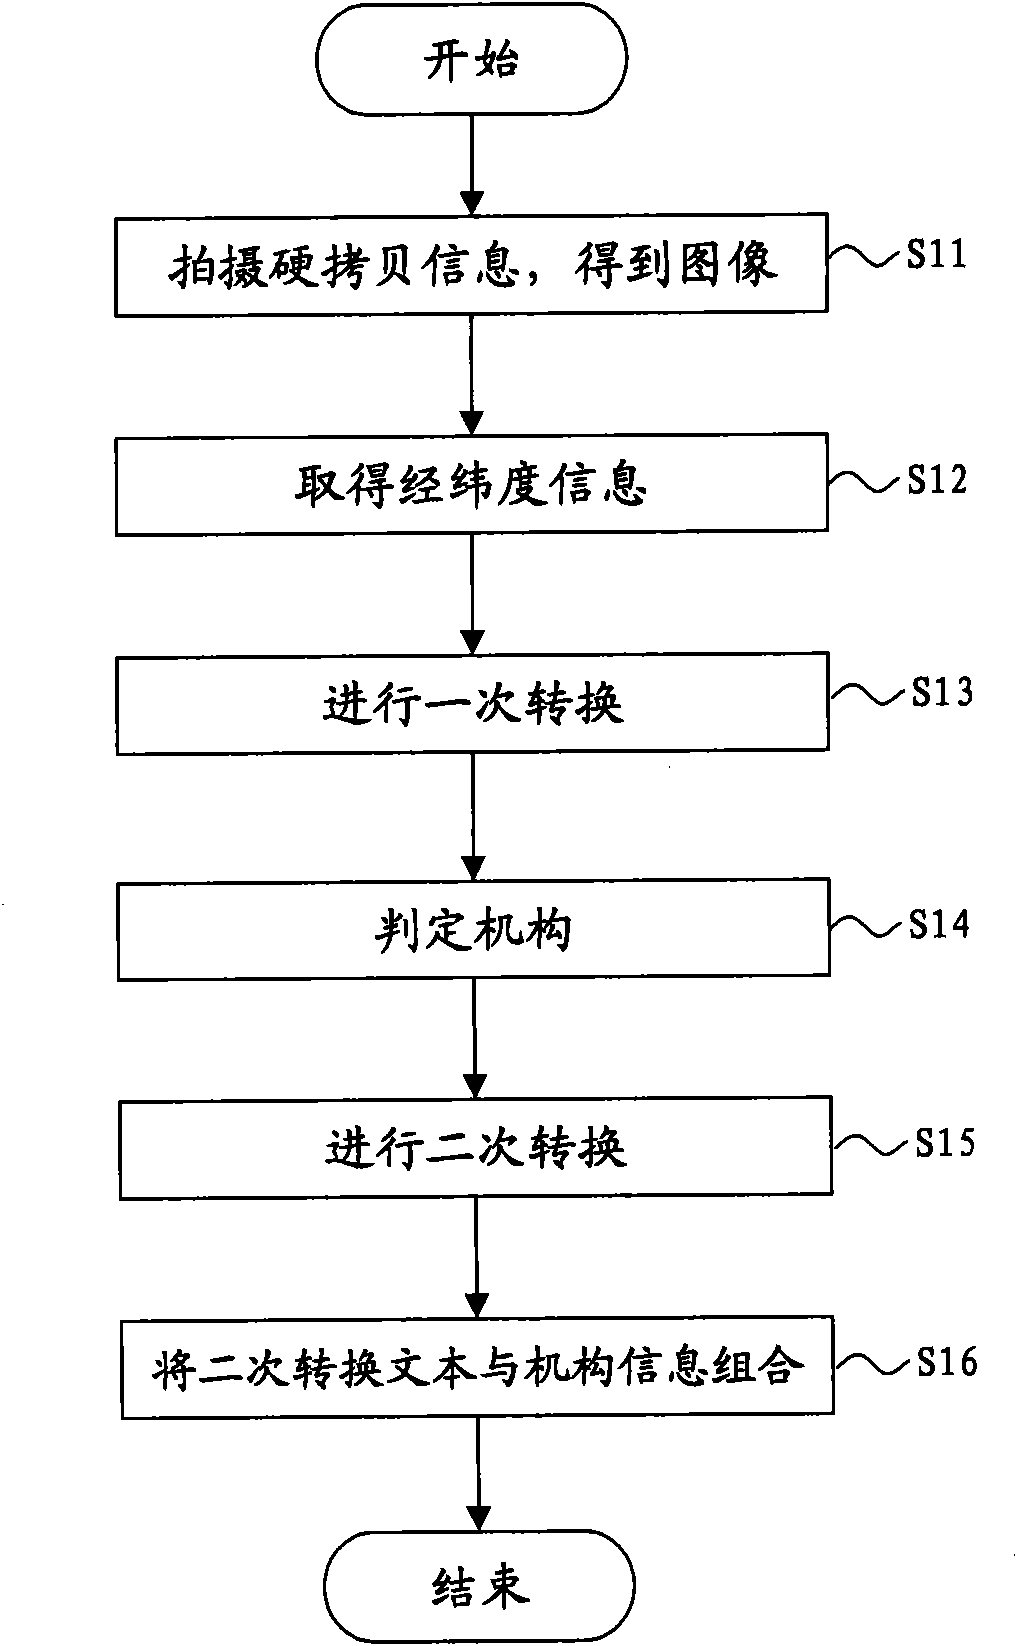 System and method for processing hardcopy information